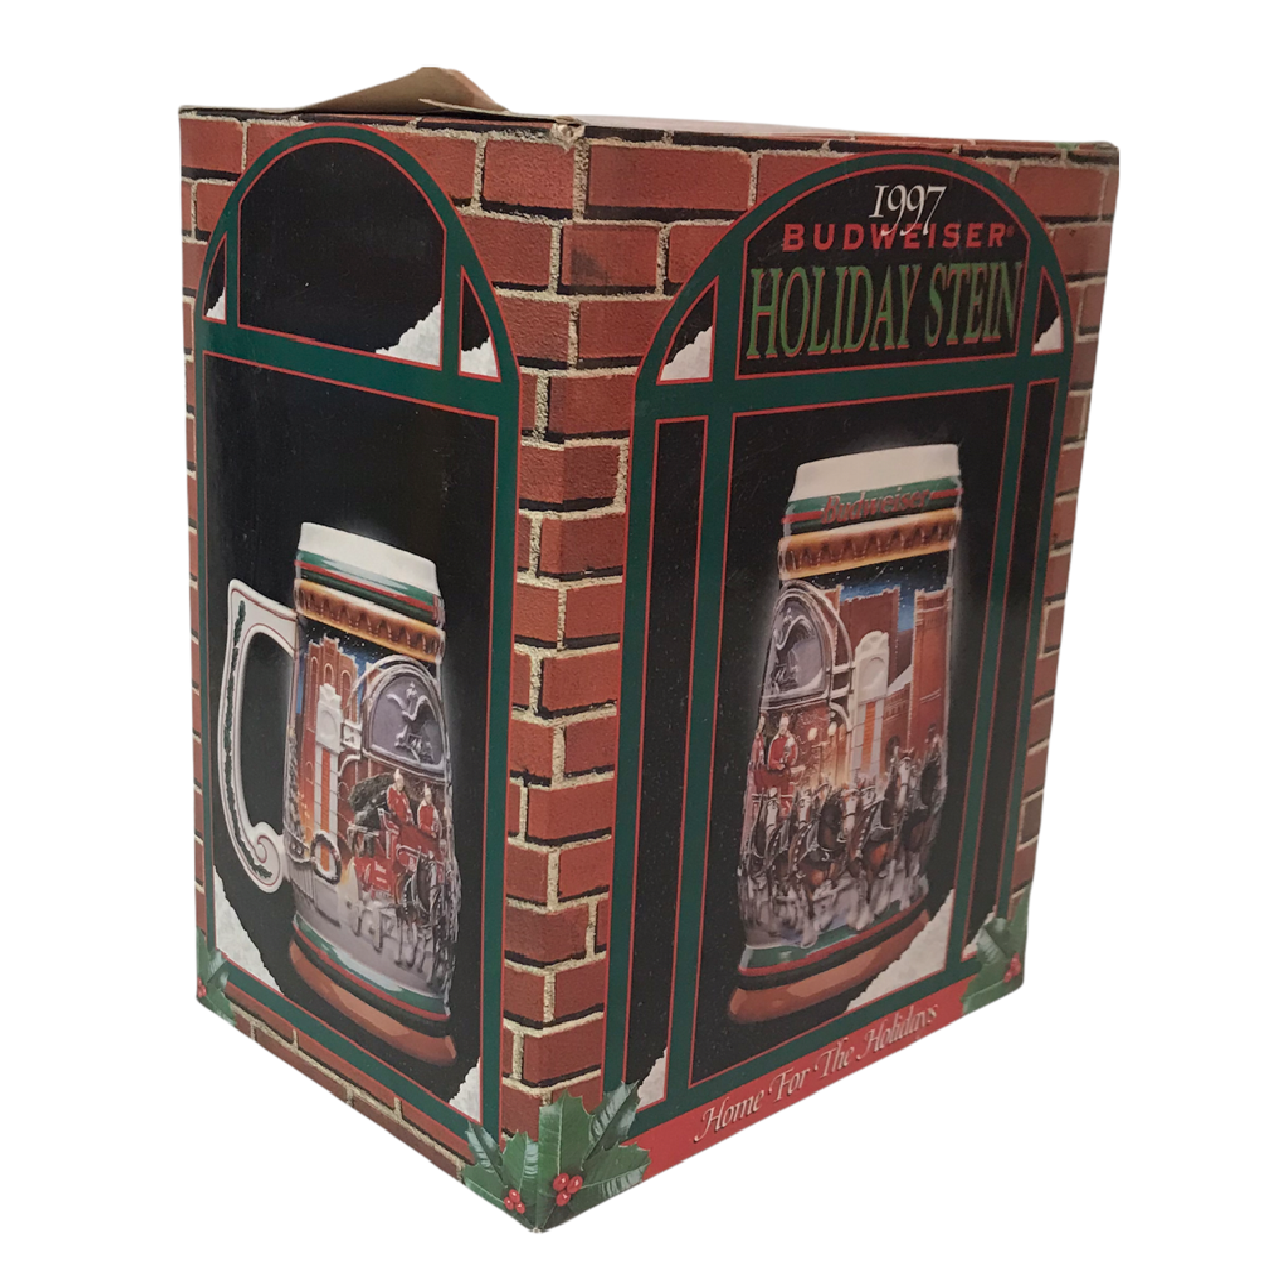 Budweiser Holiday Series Stein 1997 Clydesdales Horses Christmas Beer Wagon Box - $16.42